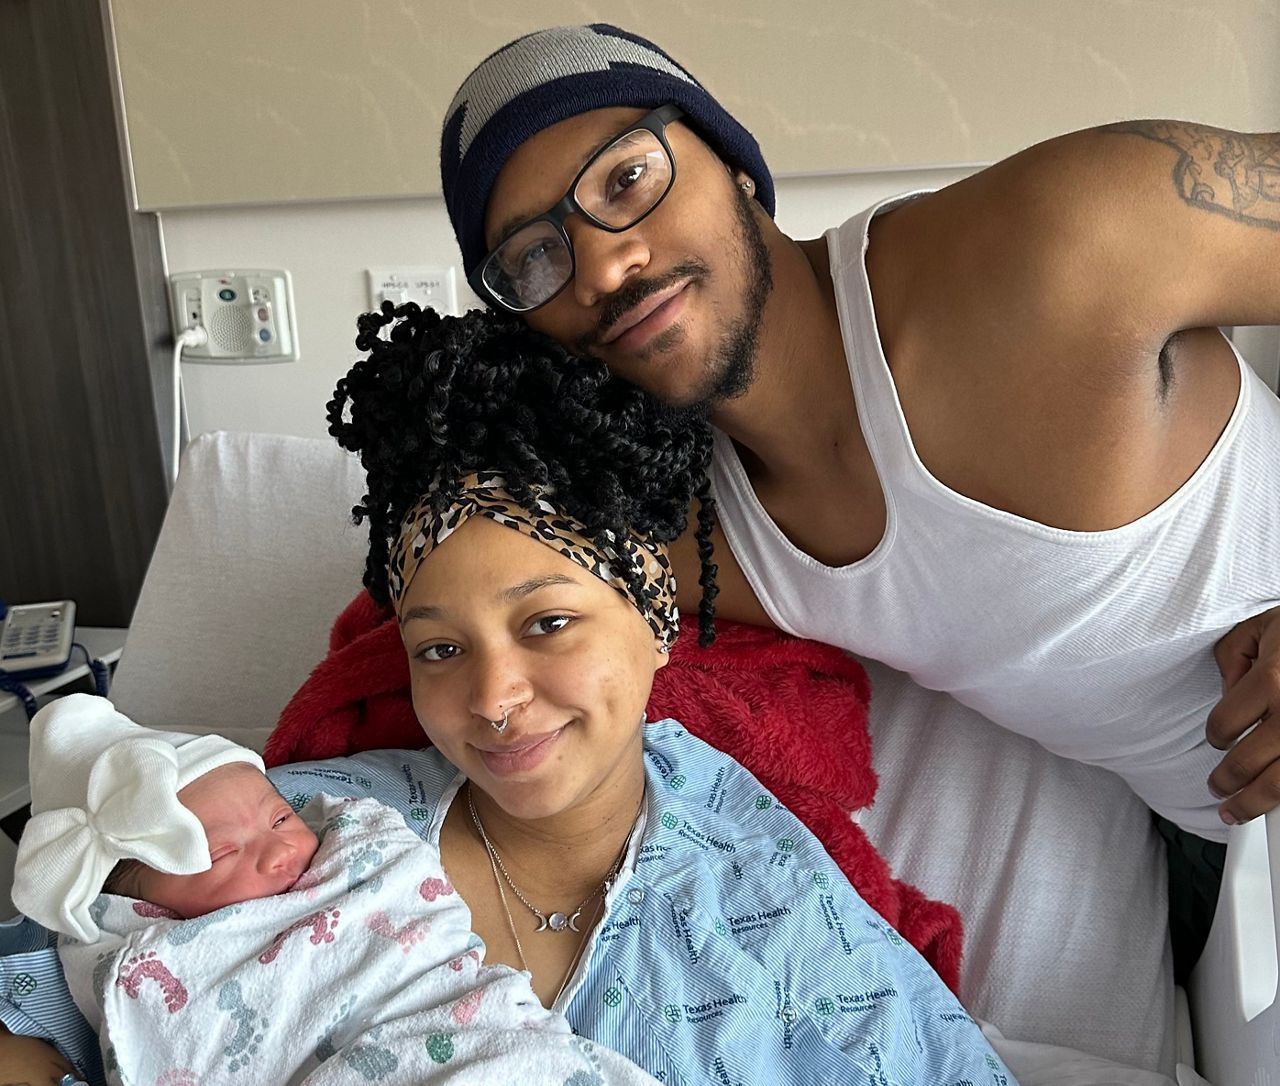 Garland, Texas, resident Tiayana Hardy’s daughter, Laylani, was born last November. Hardy has relied on continuous Medicaid coverage, but could risk losing it because the COVID public health emergency is ending. (Courtesy of Tiayana Hardy)